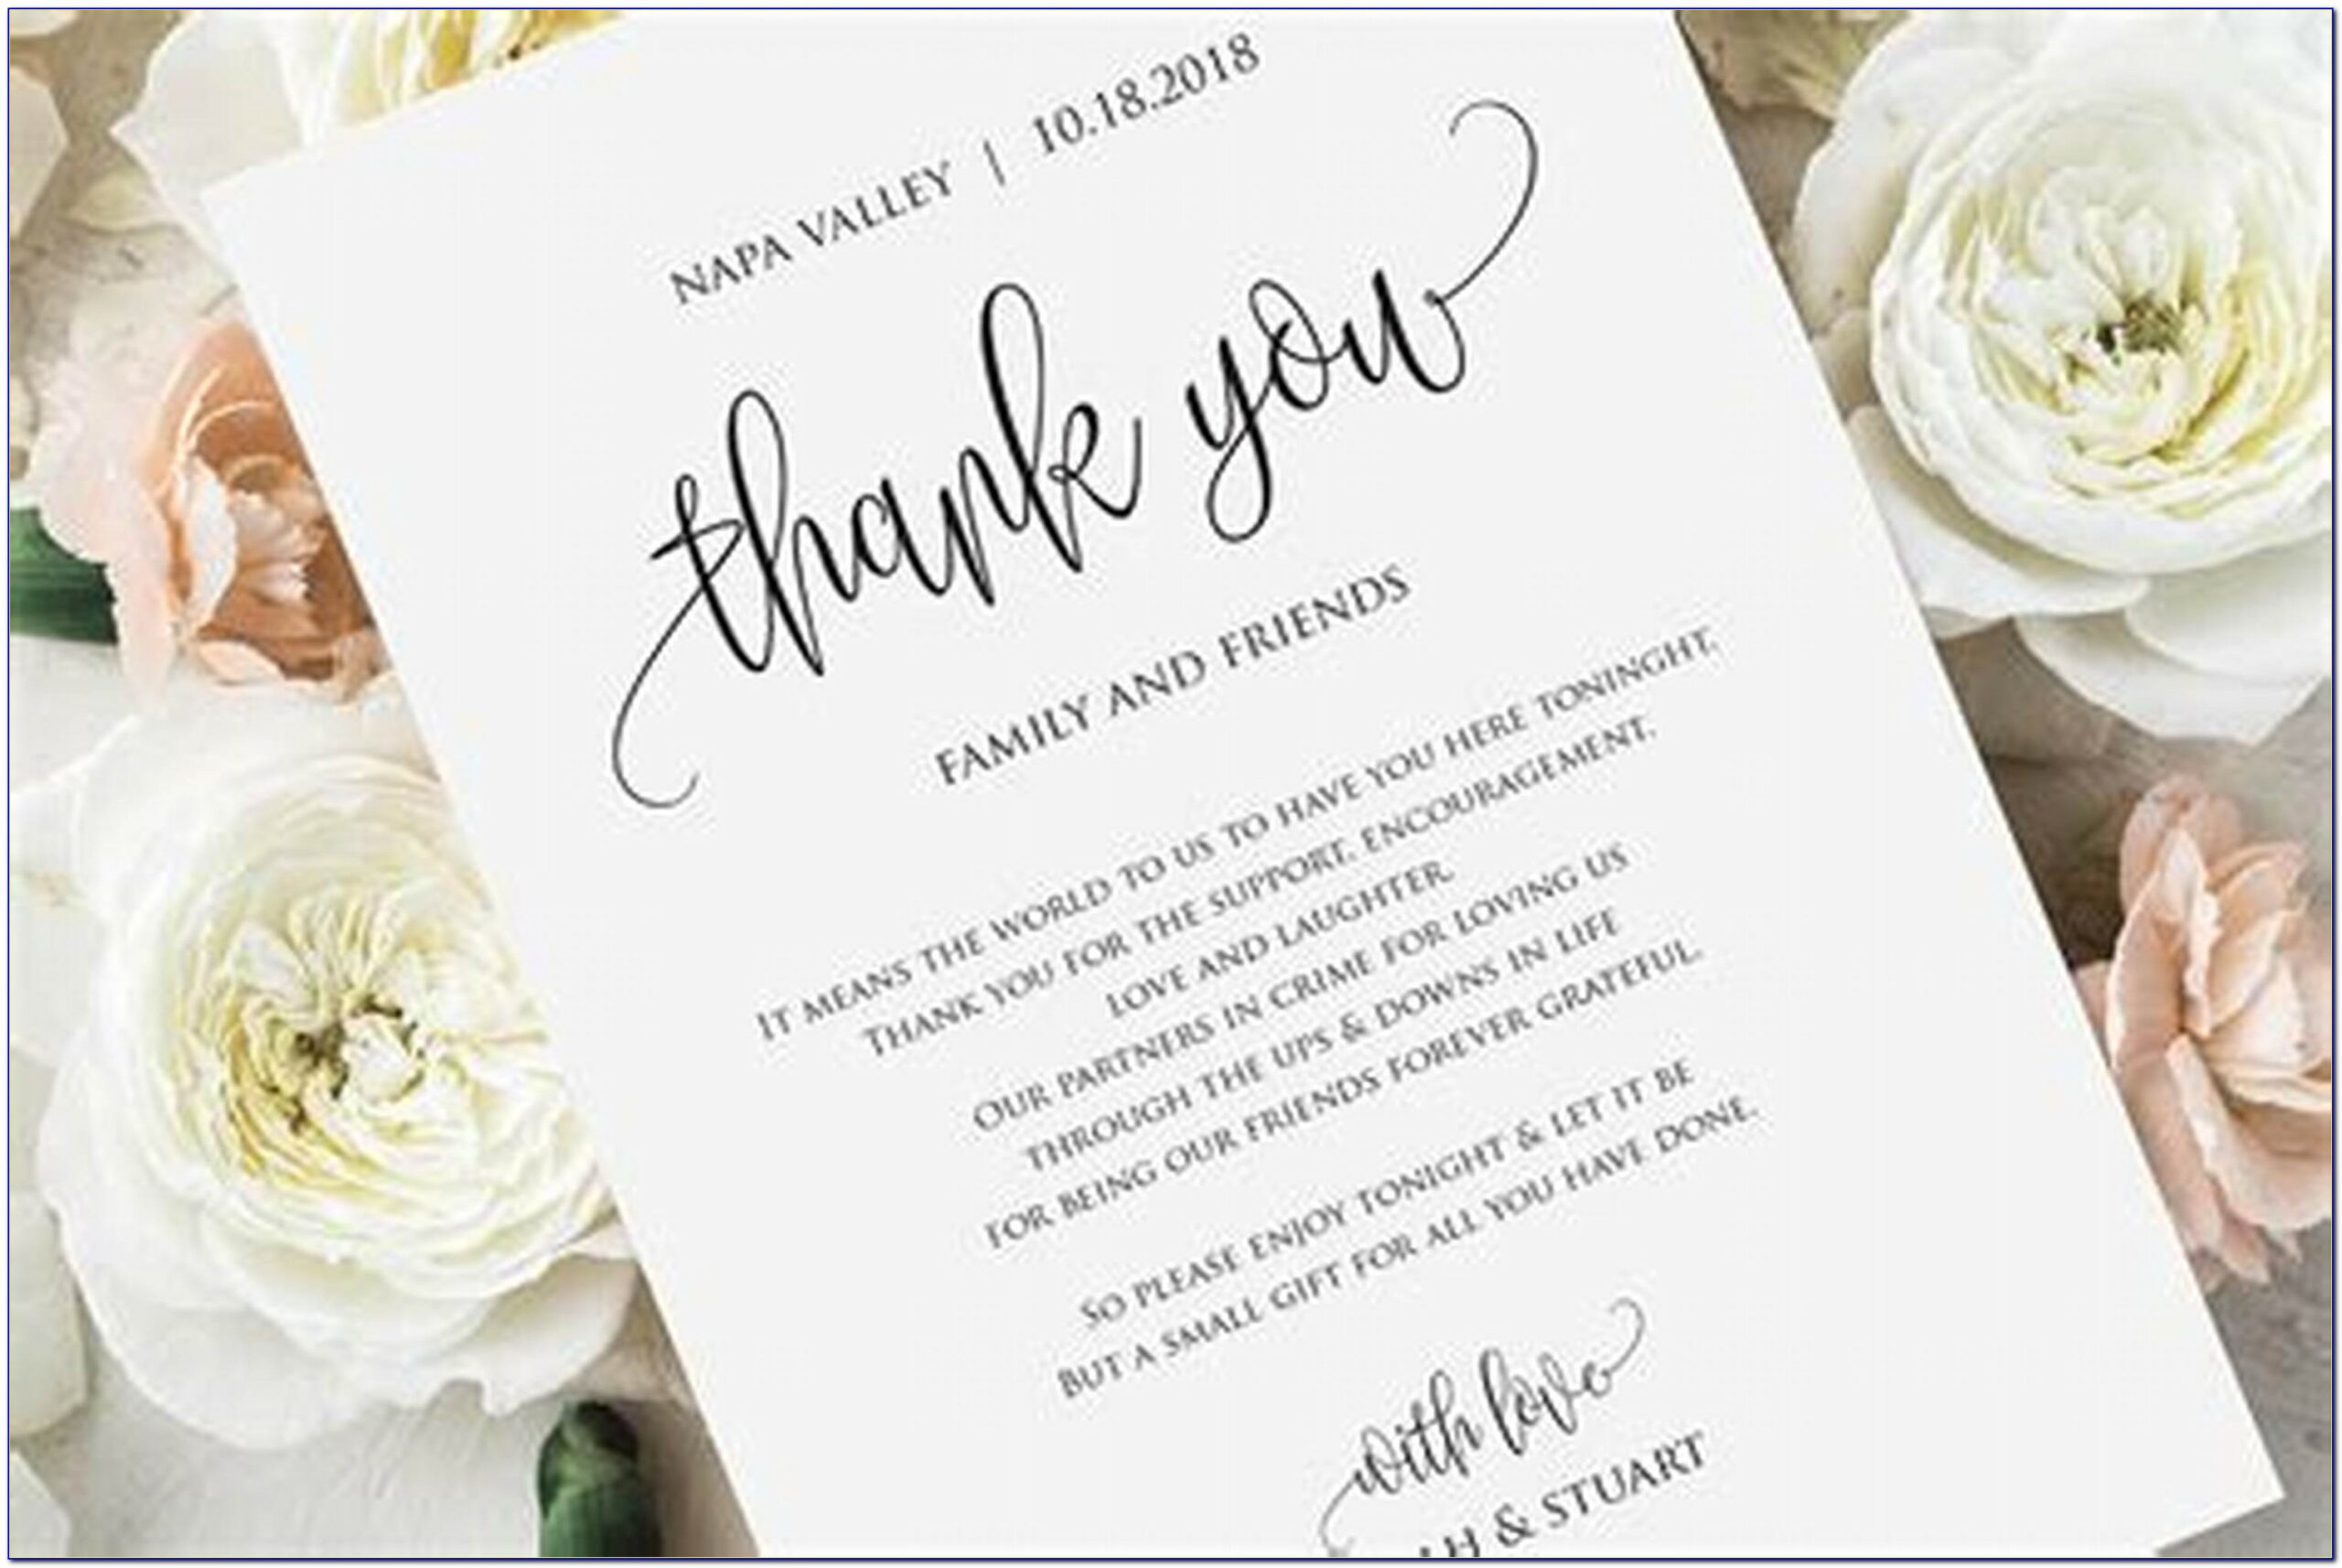 Wedding Thank You Cards Template